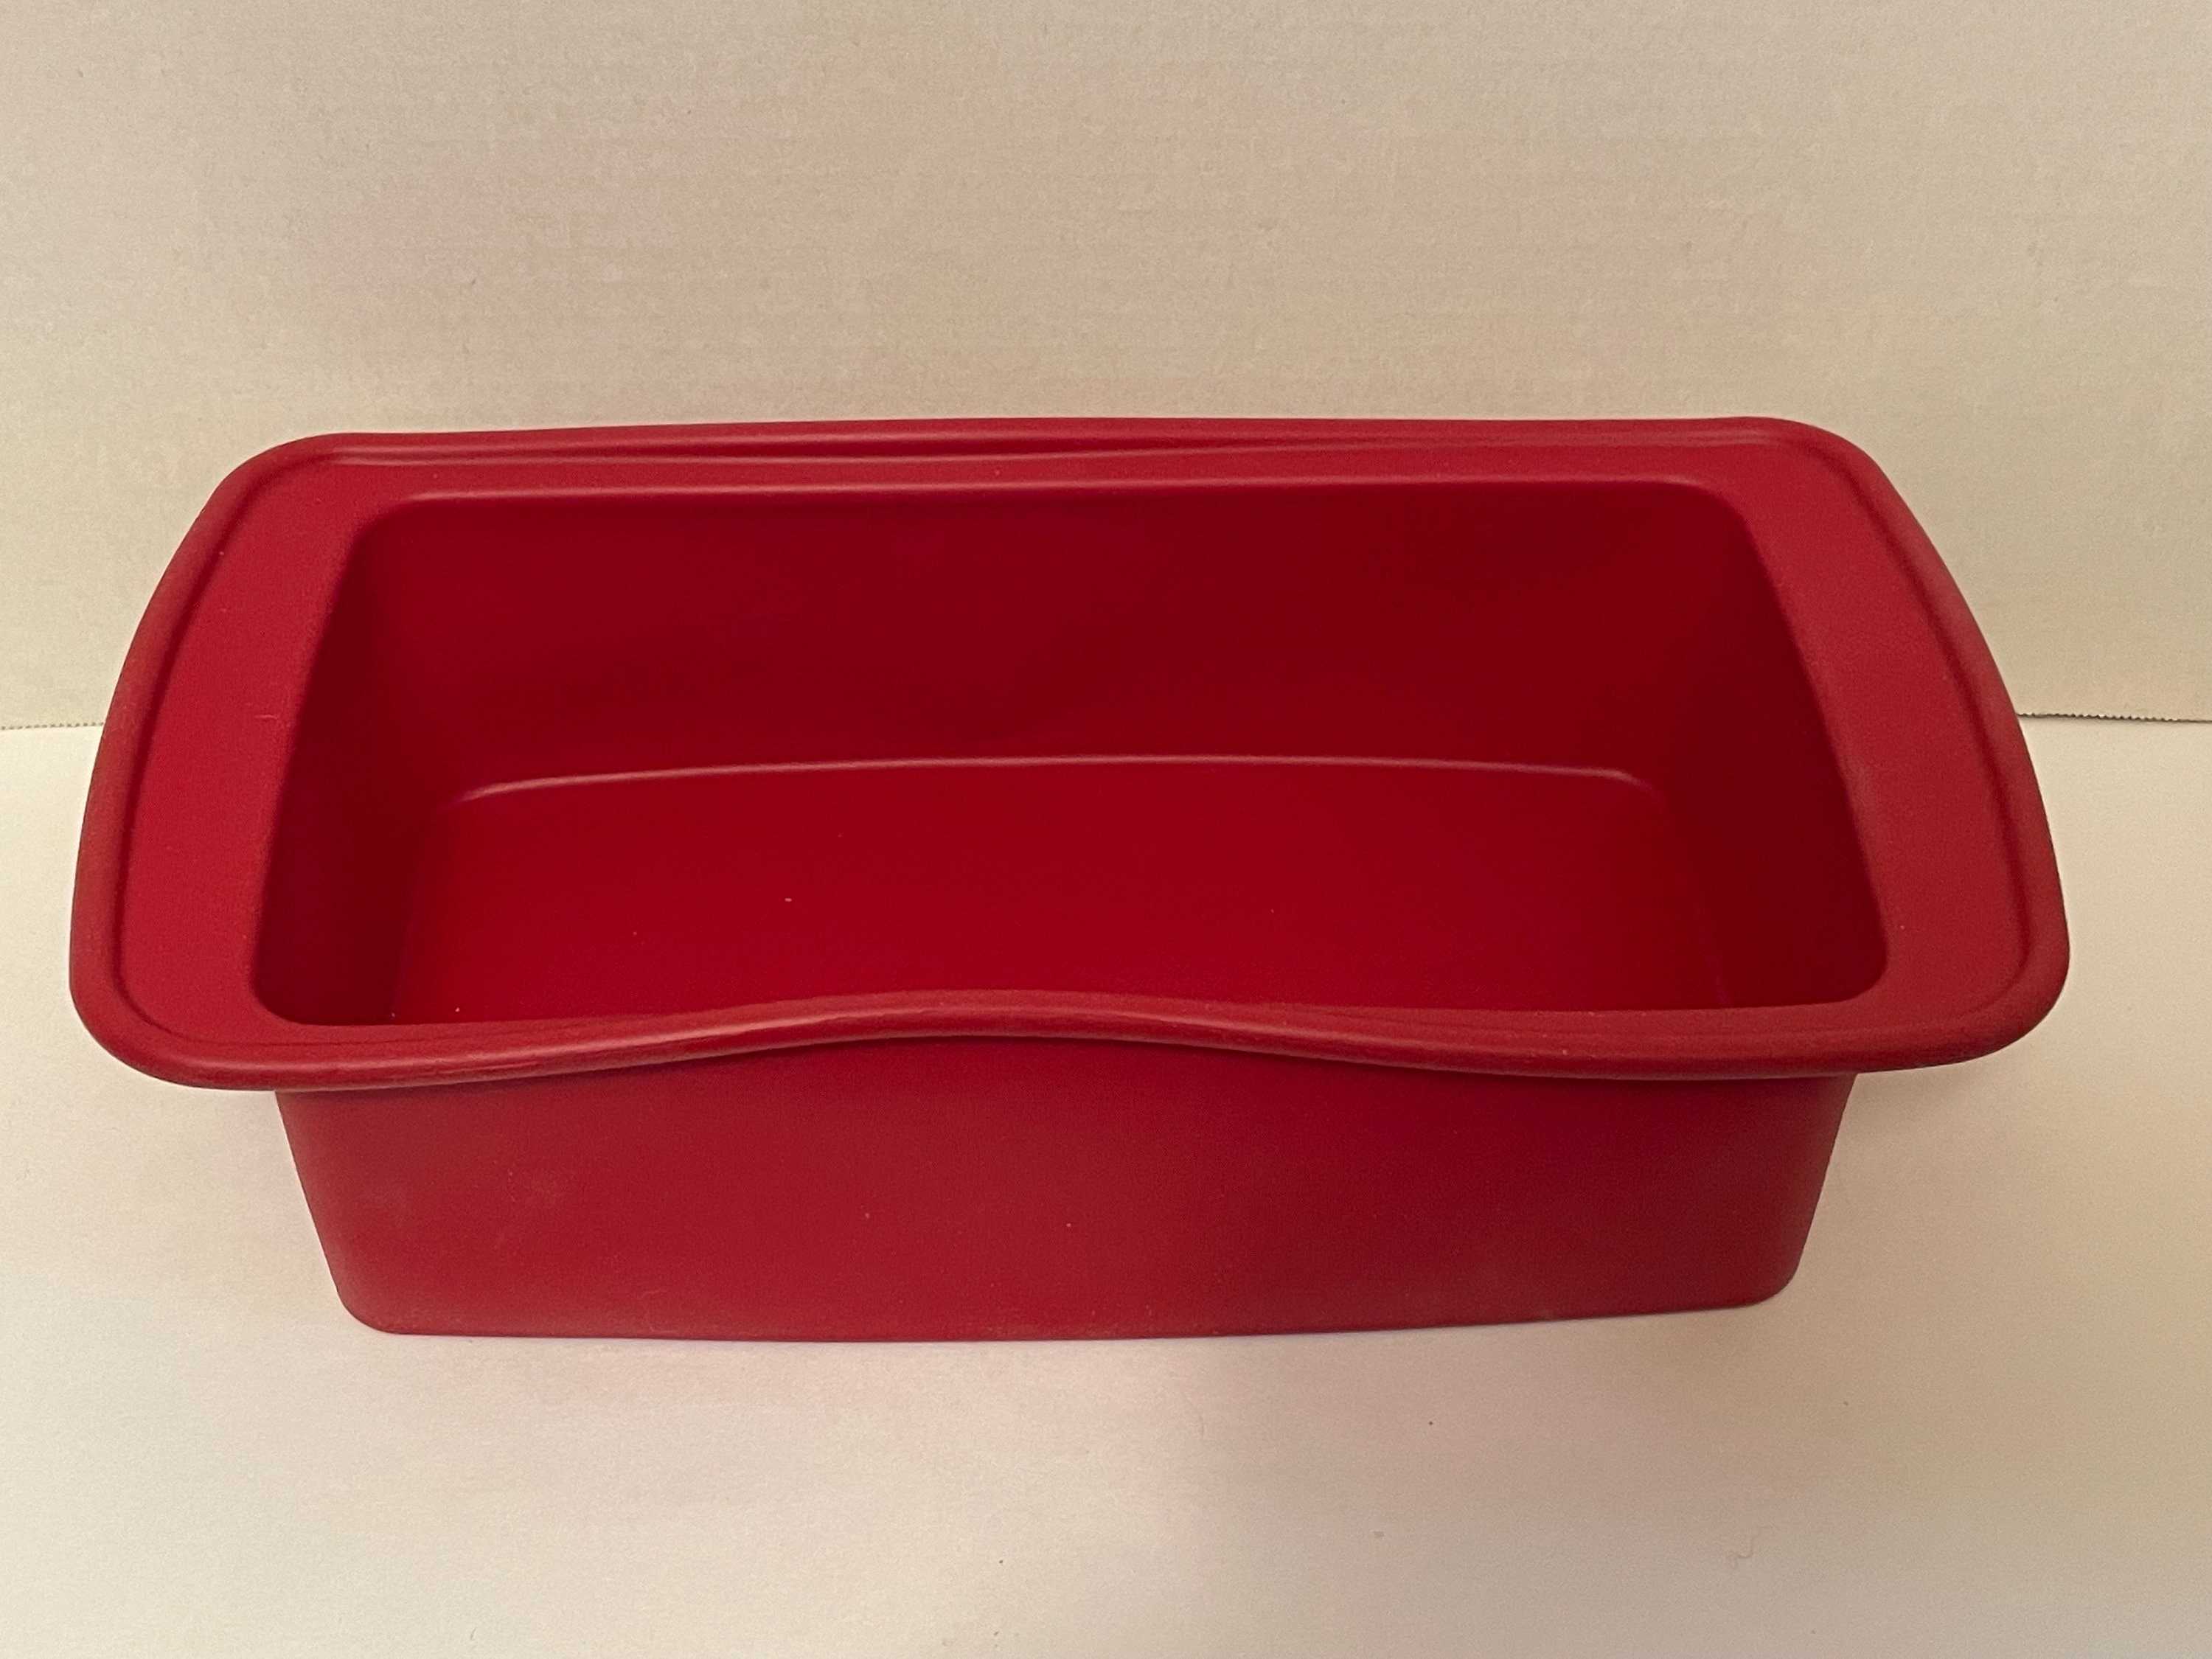 New Condition, Silicone Loaf Baking Pan, 9 X 5 Inches 